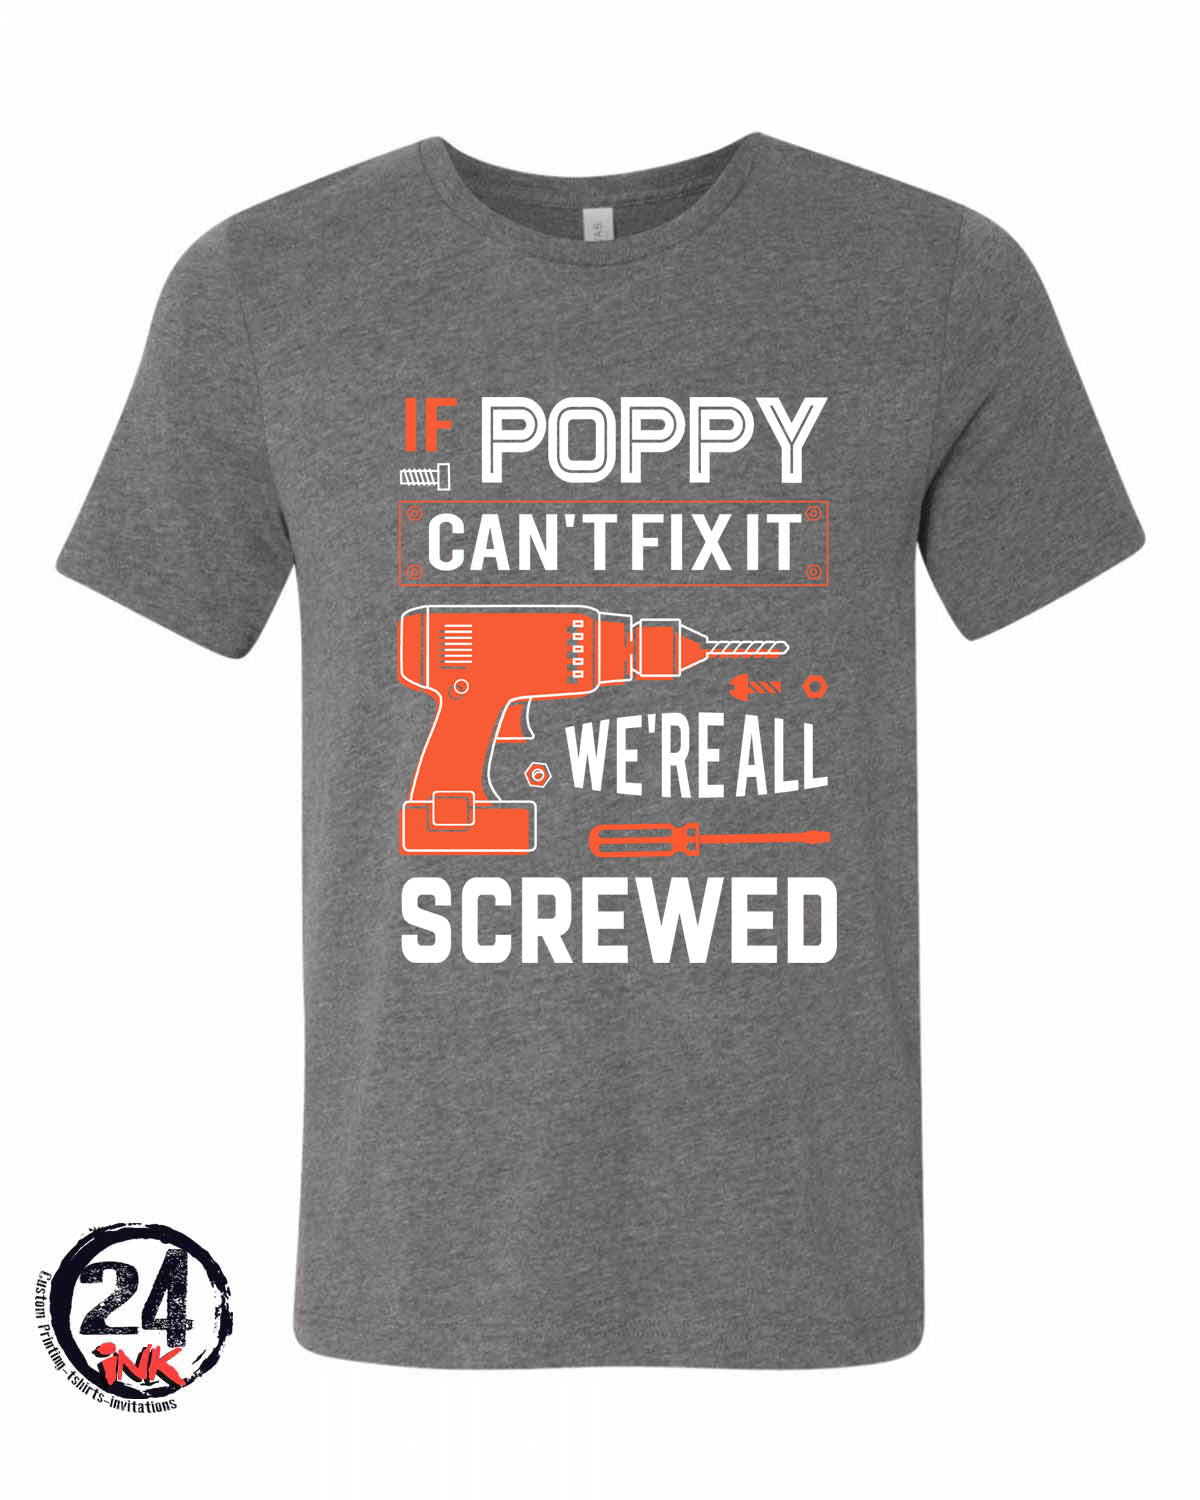 If Poppy Can't Fix it, Fathers Day